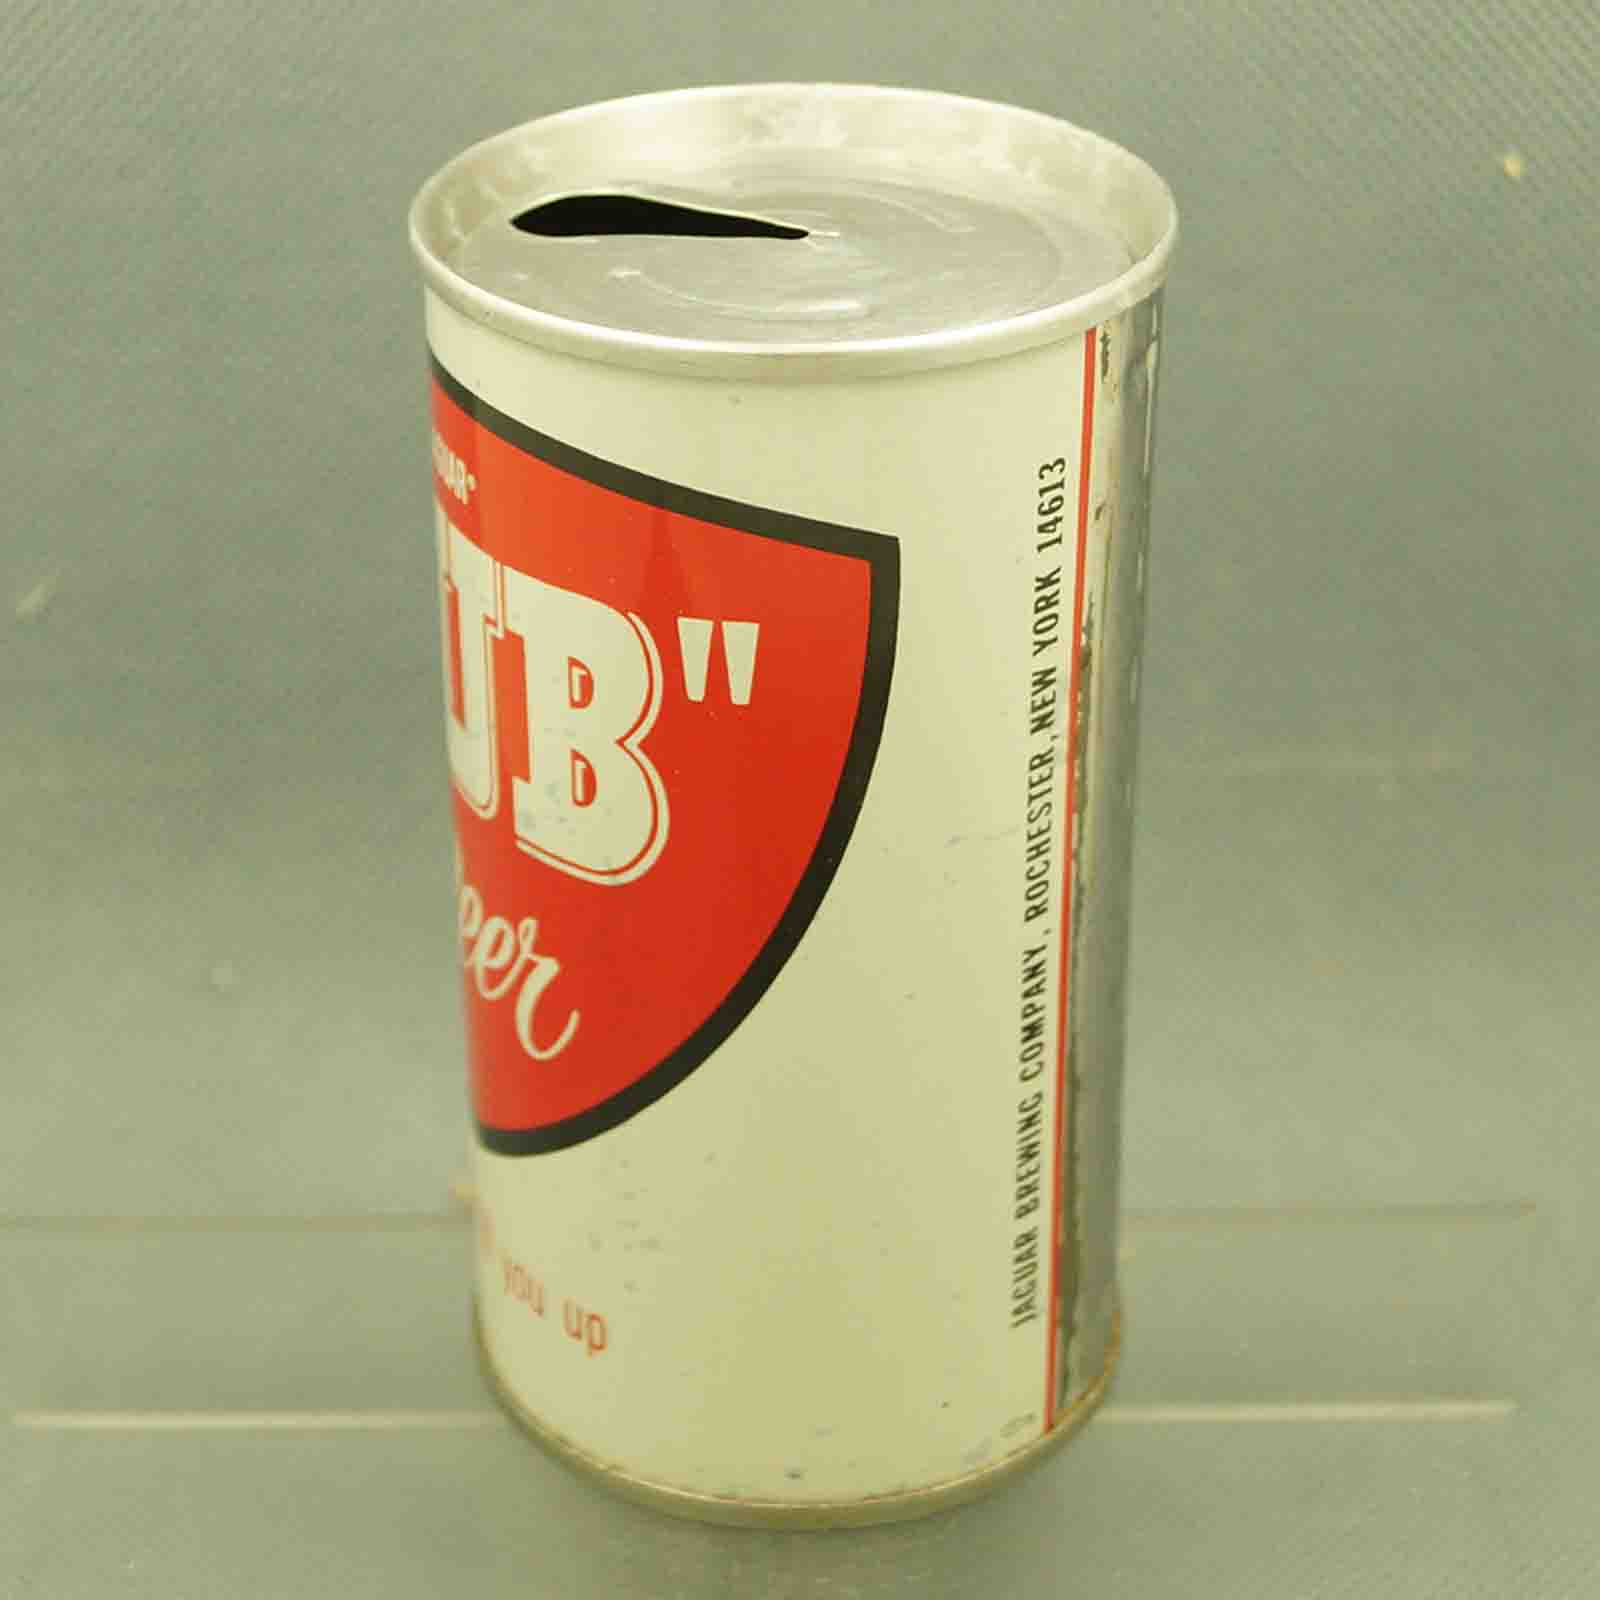 pub 82-35 pull tab beer can 2